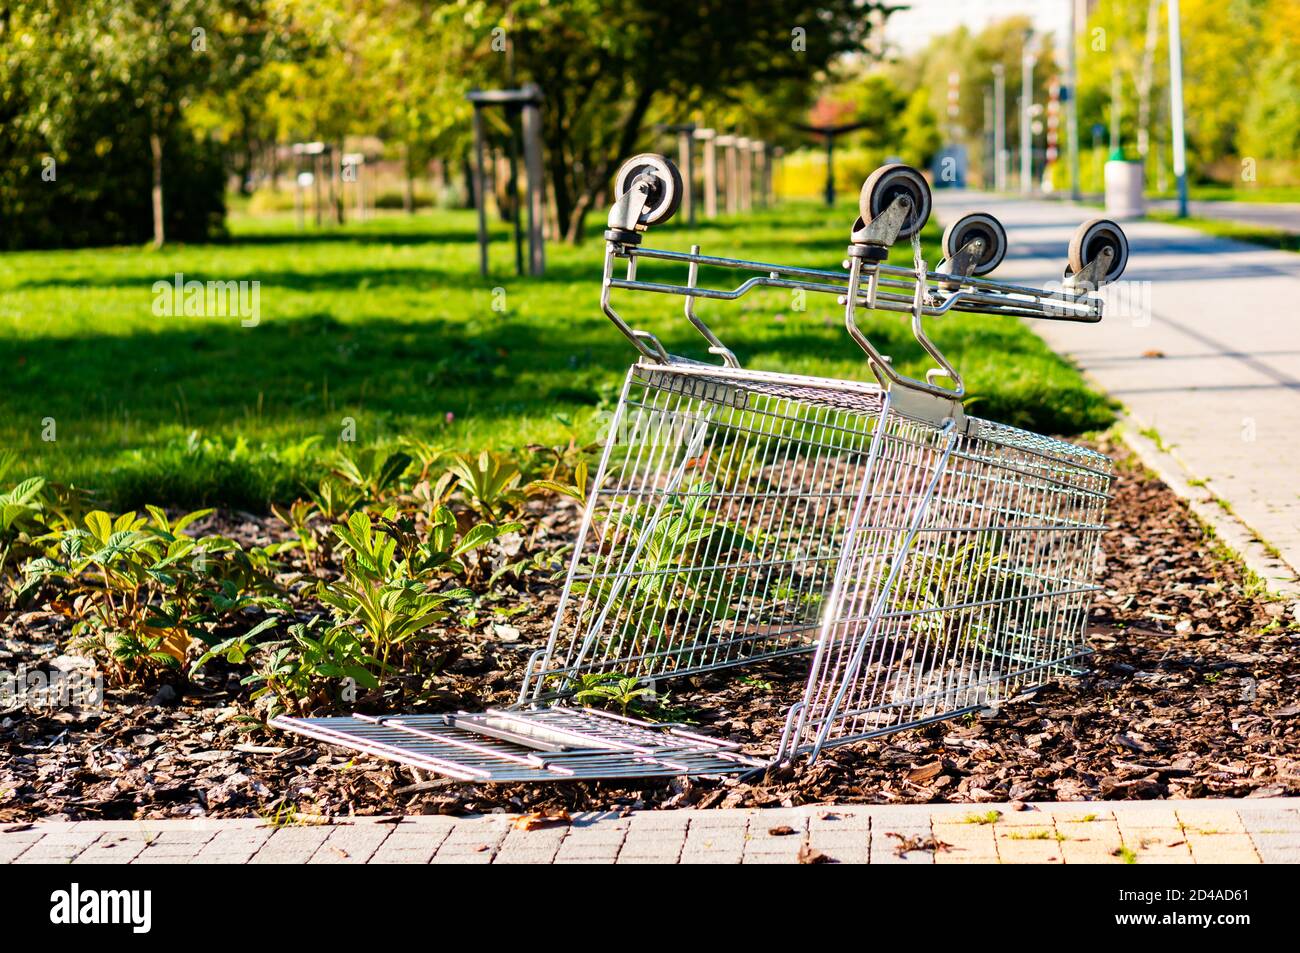 POZNAN, POLAND - Oct 03, 2020: Metal shopping cart laying upside down on the ground at a park Stock Photo